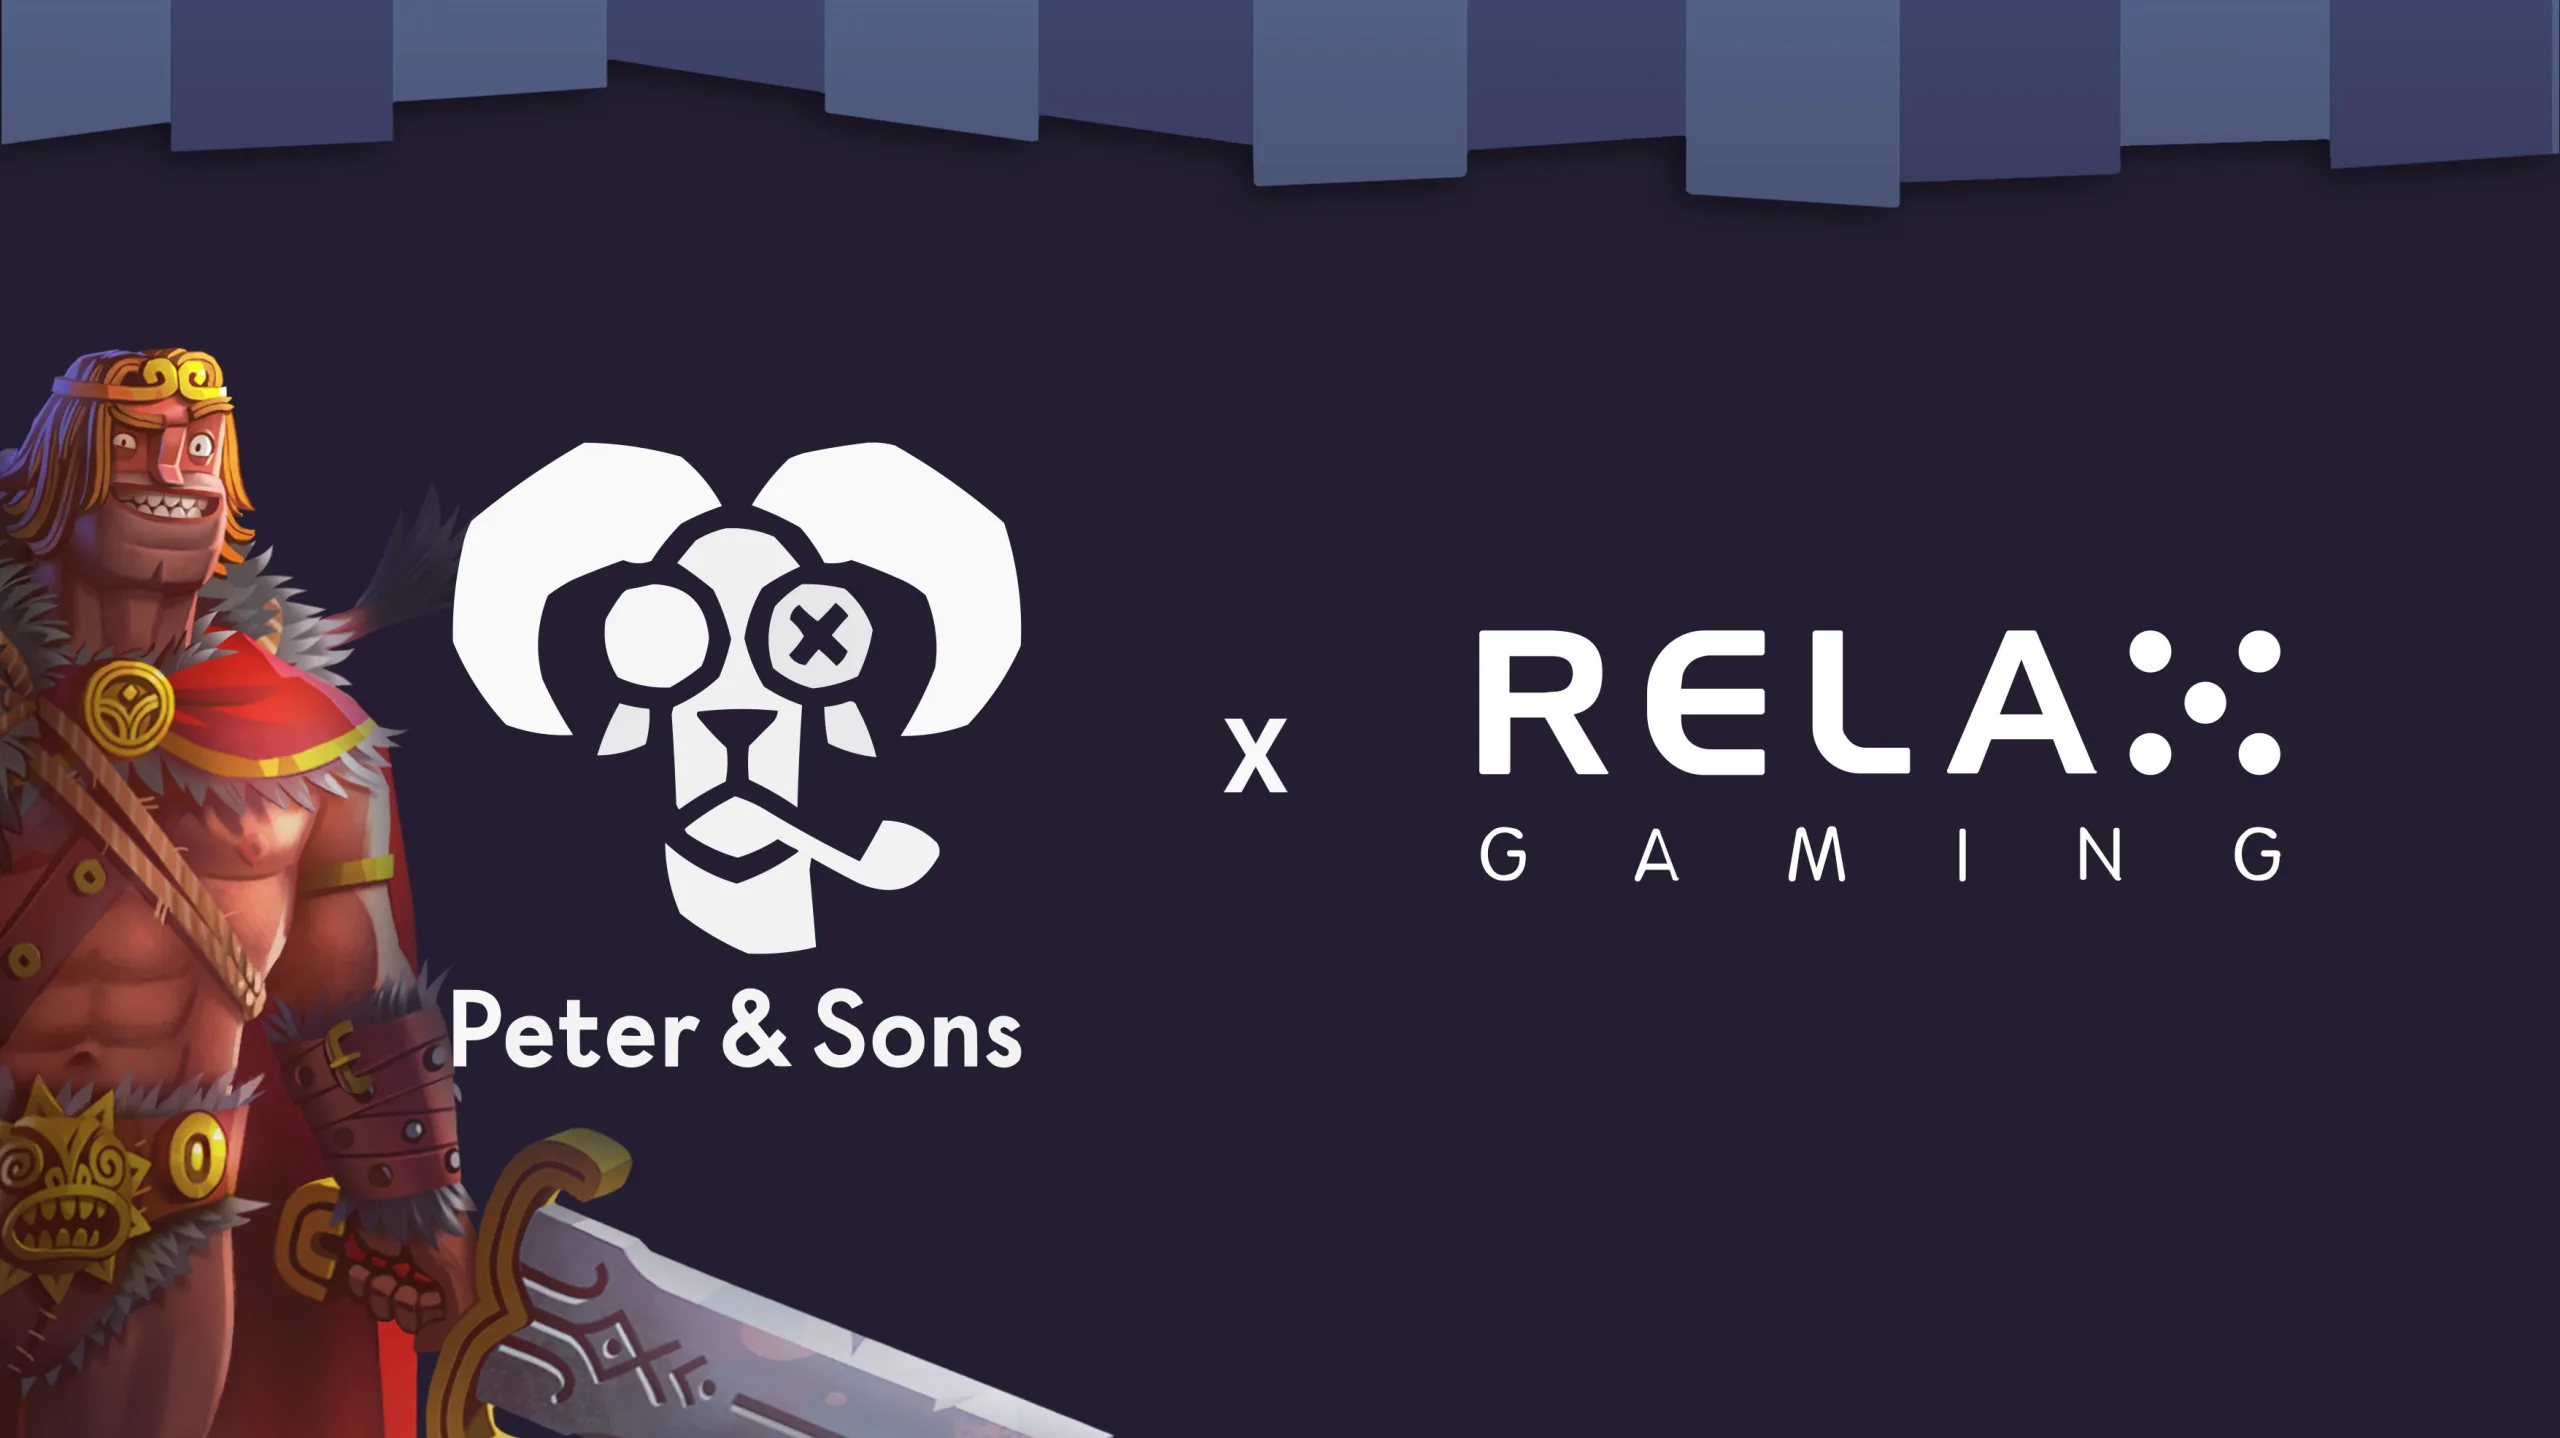 Peter & Sons Announce New Partnership with Relax Gaming as Latest Powered by Relax Partner